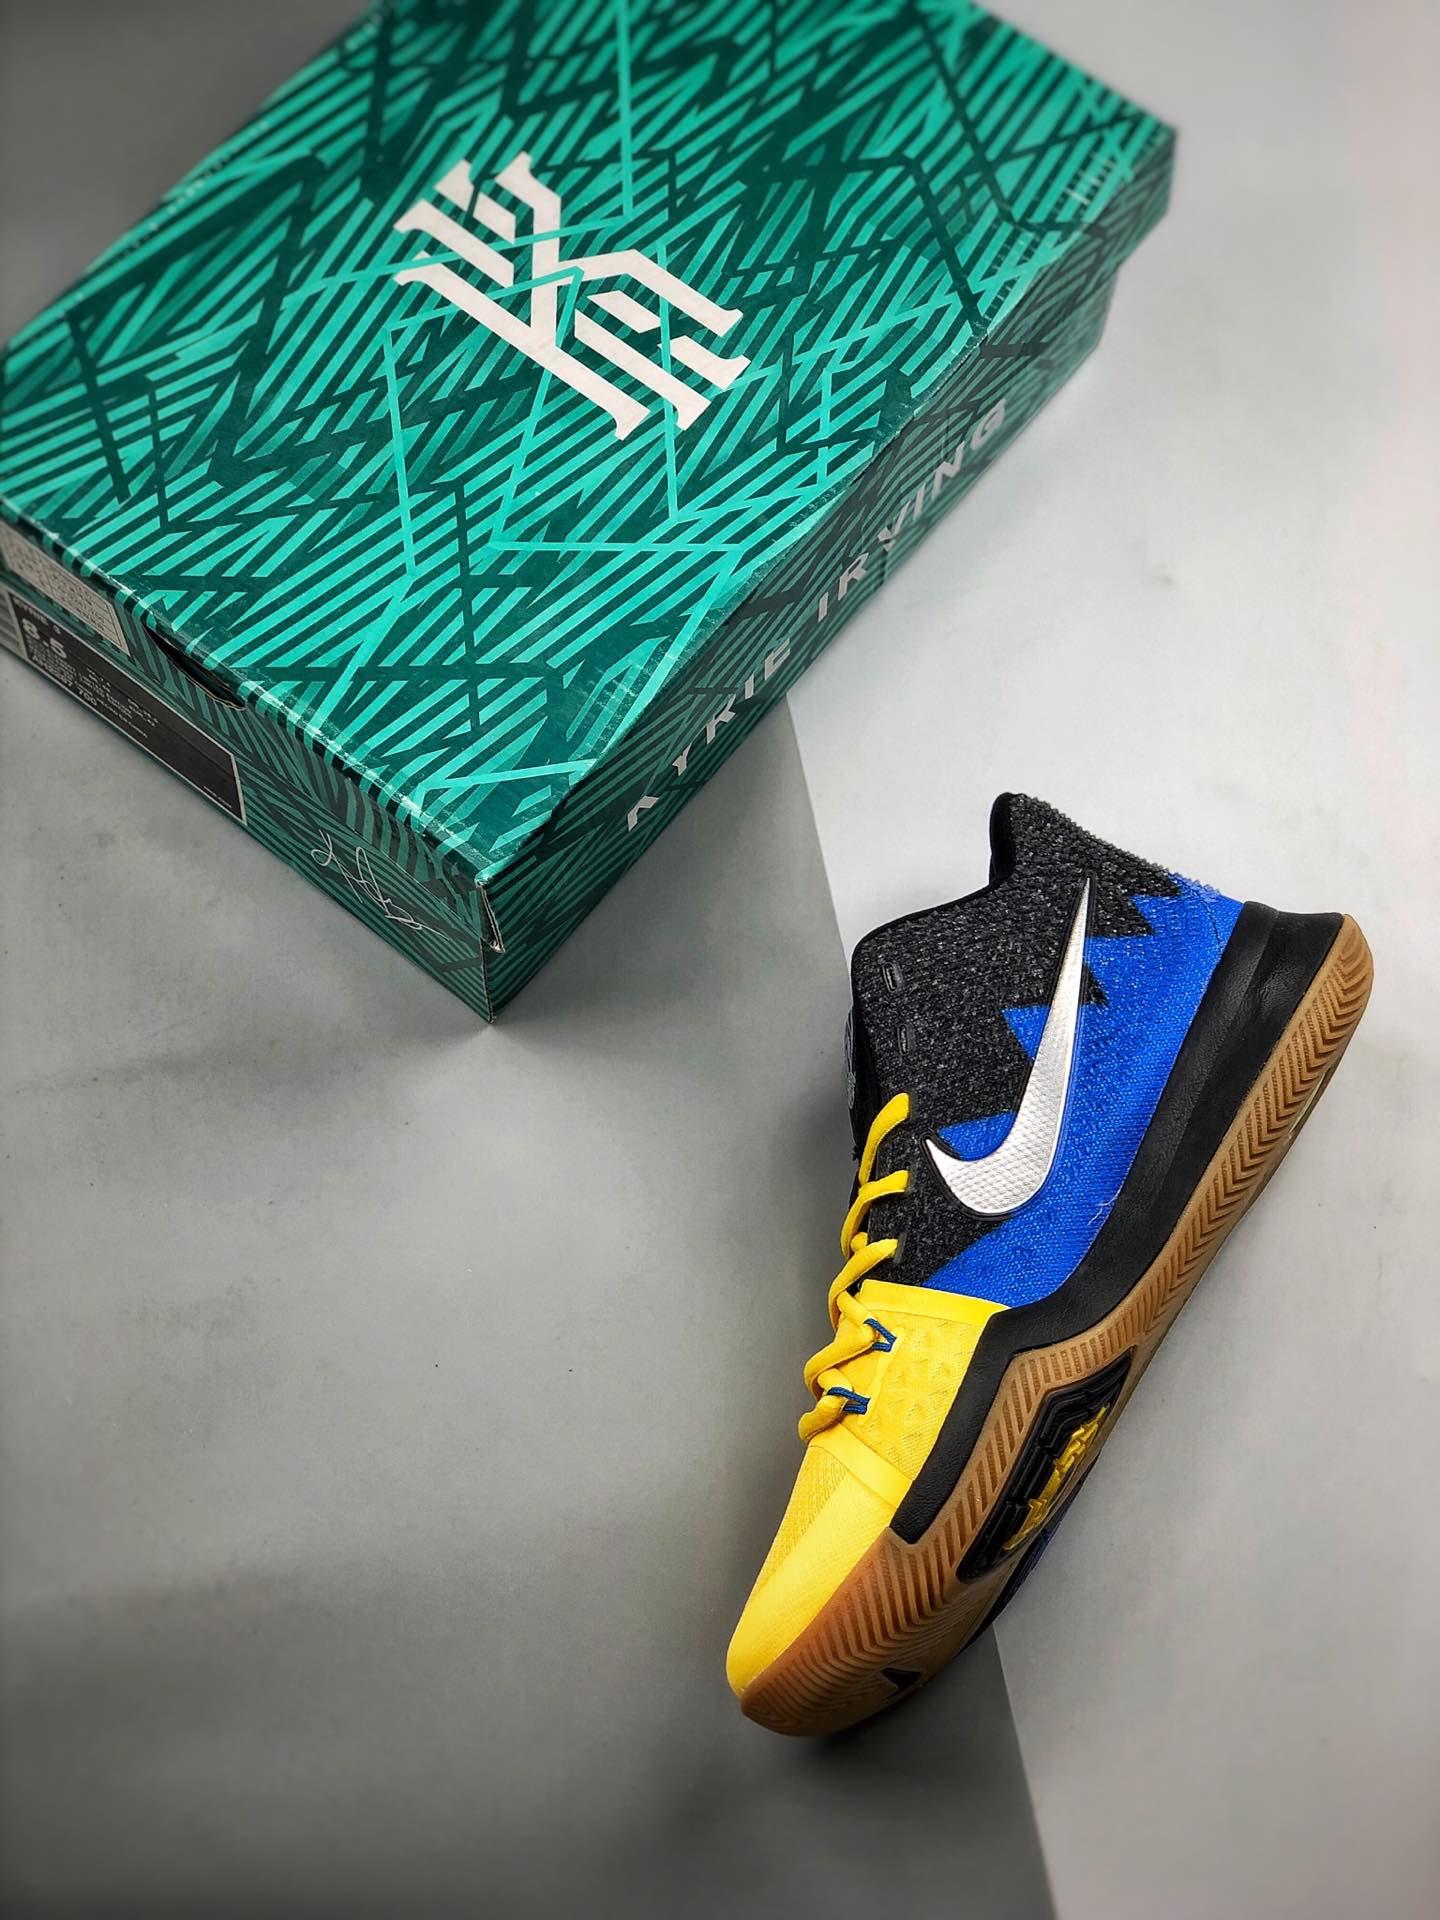 kyrie 3 finals for sale